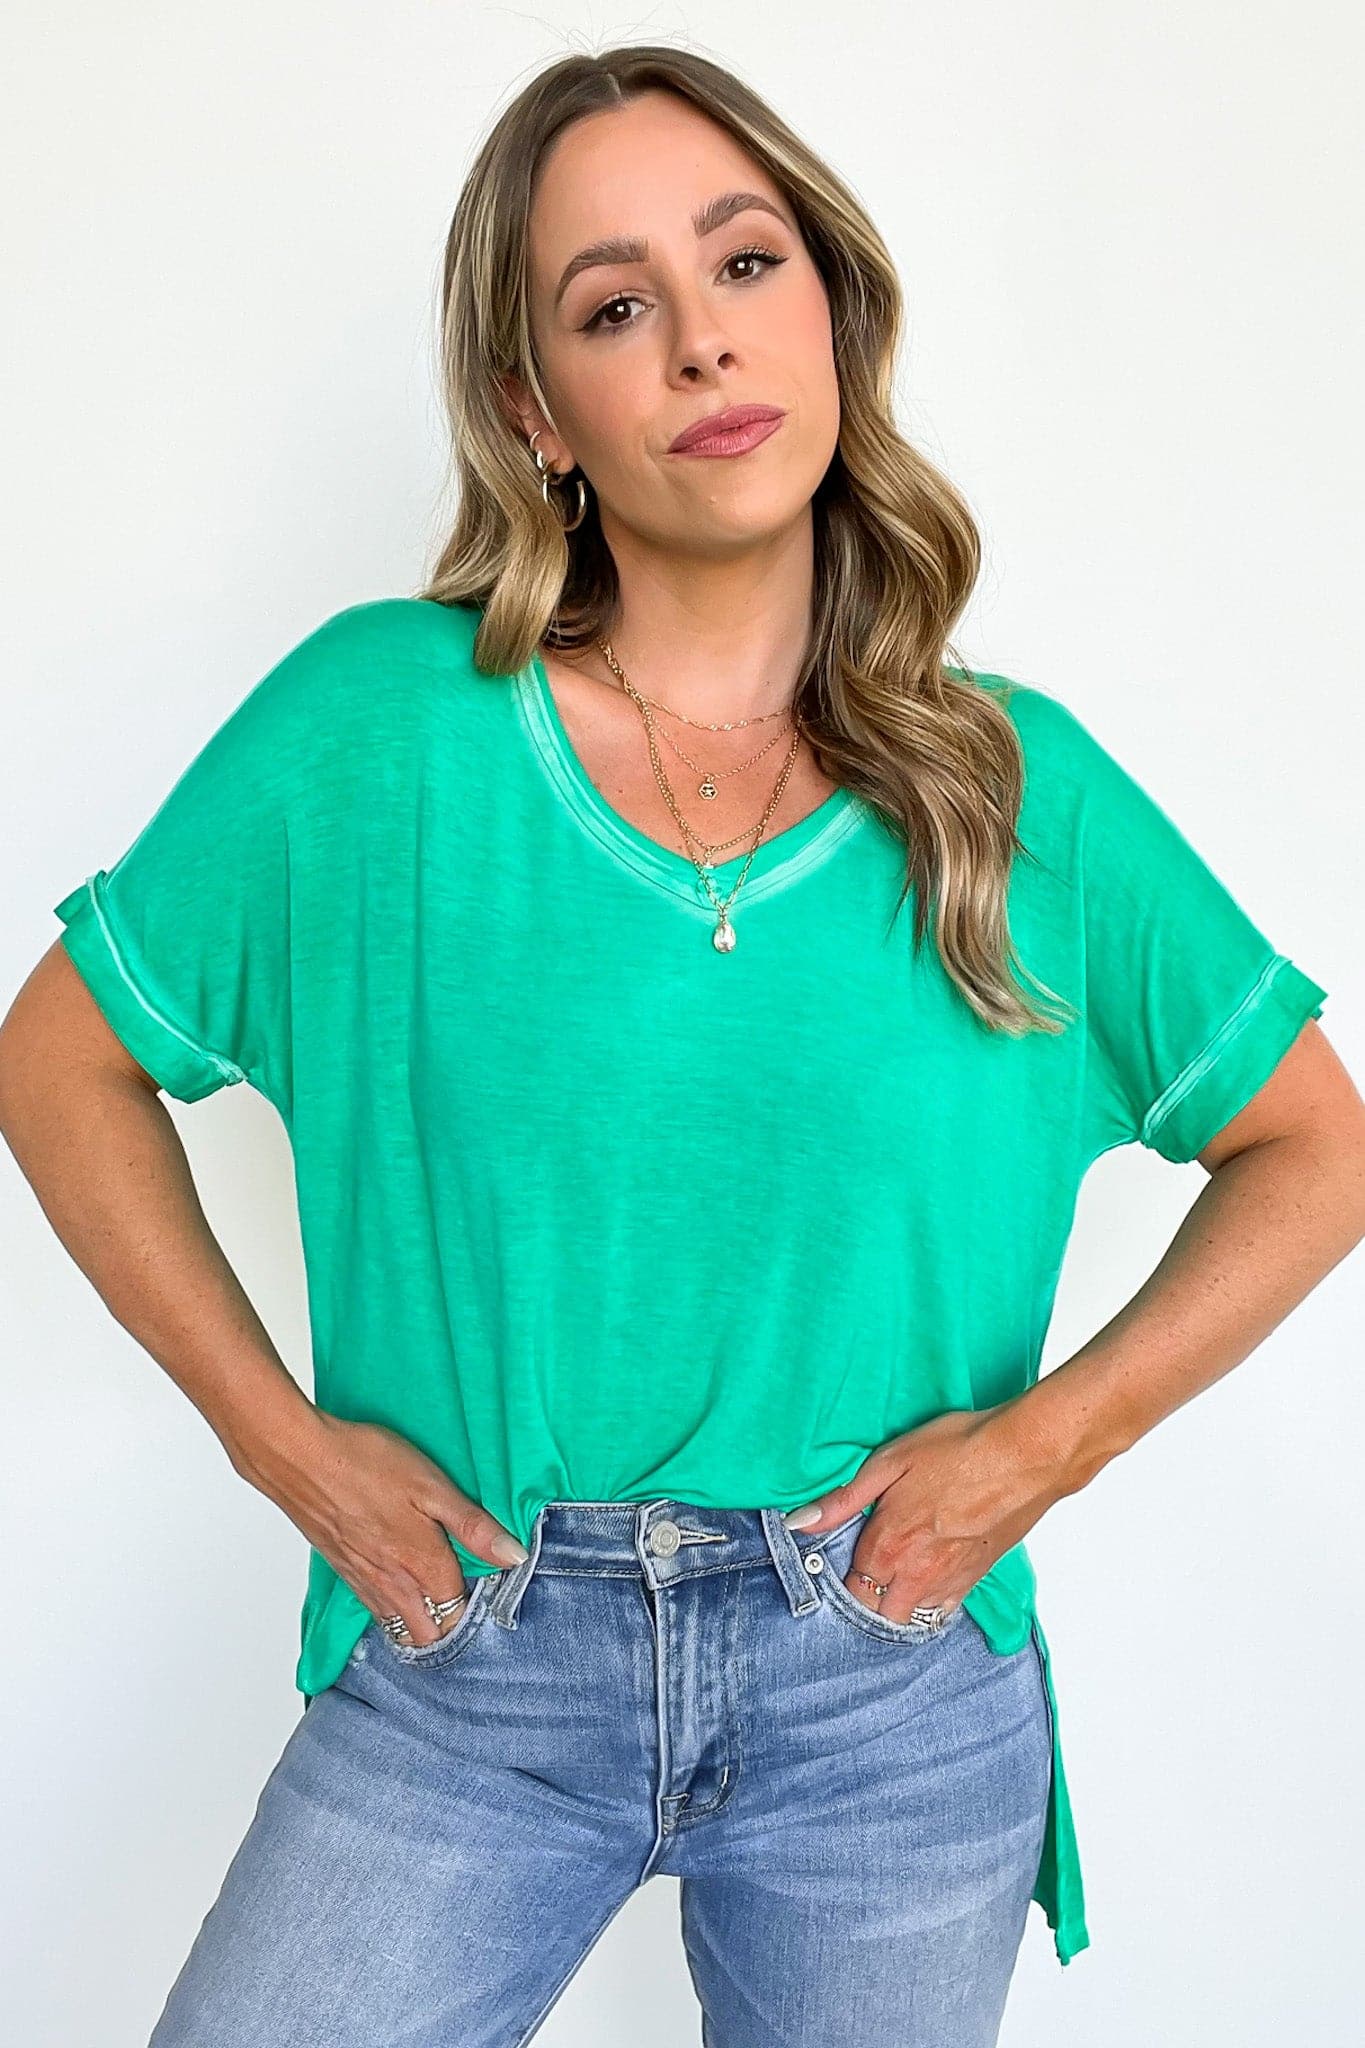  Rezah Mineral Washed V-Neck Top - BACK IN STOCK - Madison and Mallory